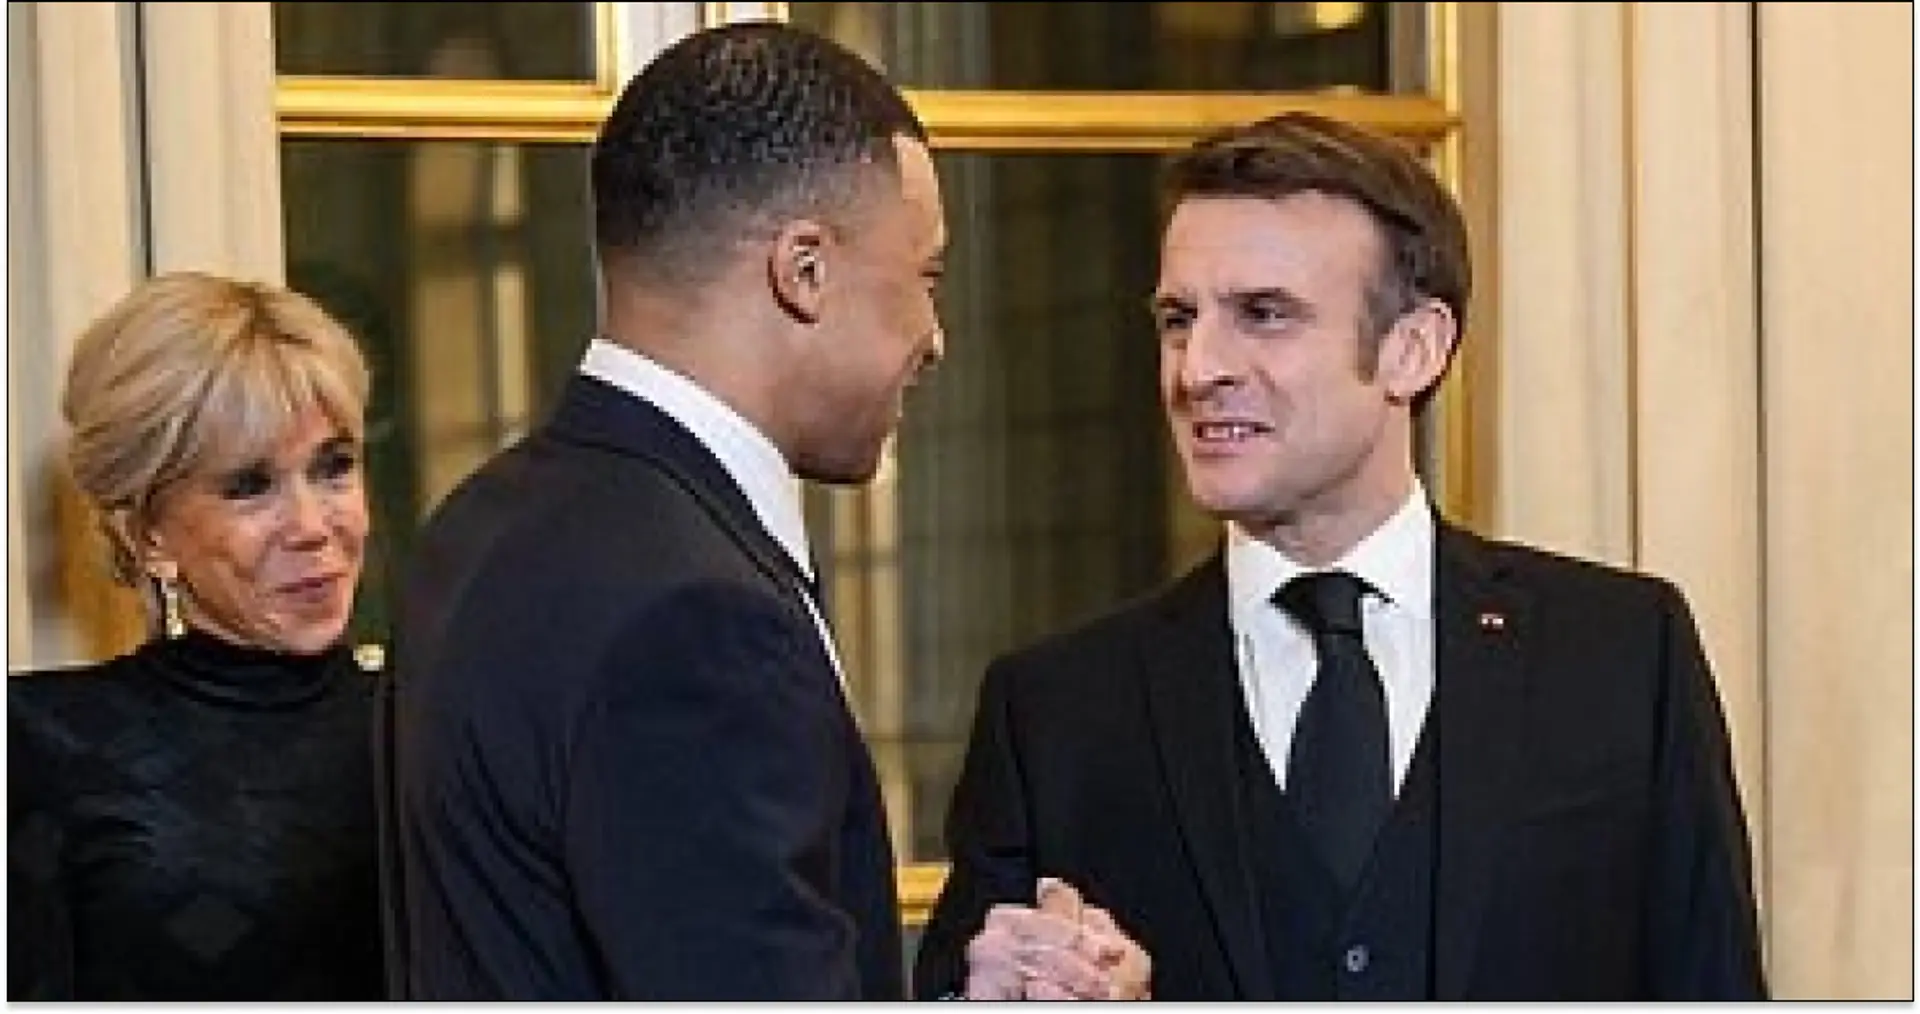 Did Macron discuss Mbappe's future when they met at Palace Elysee? France President answers